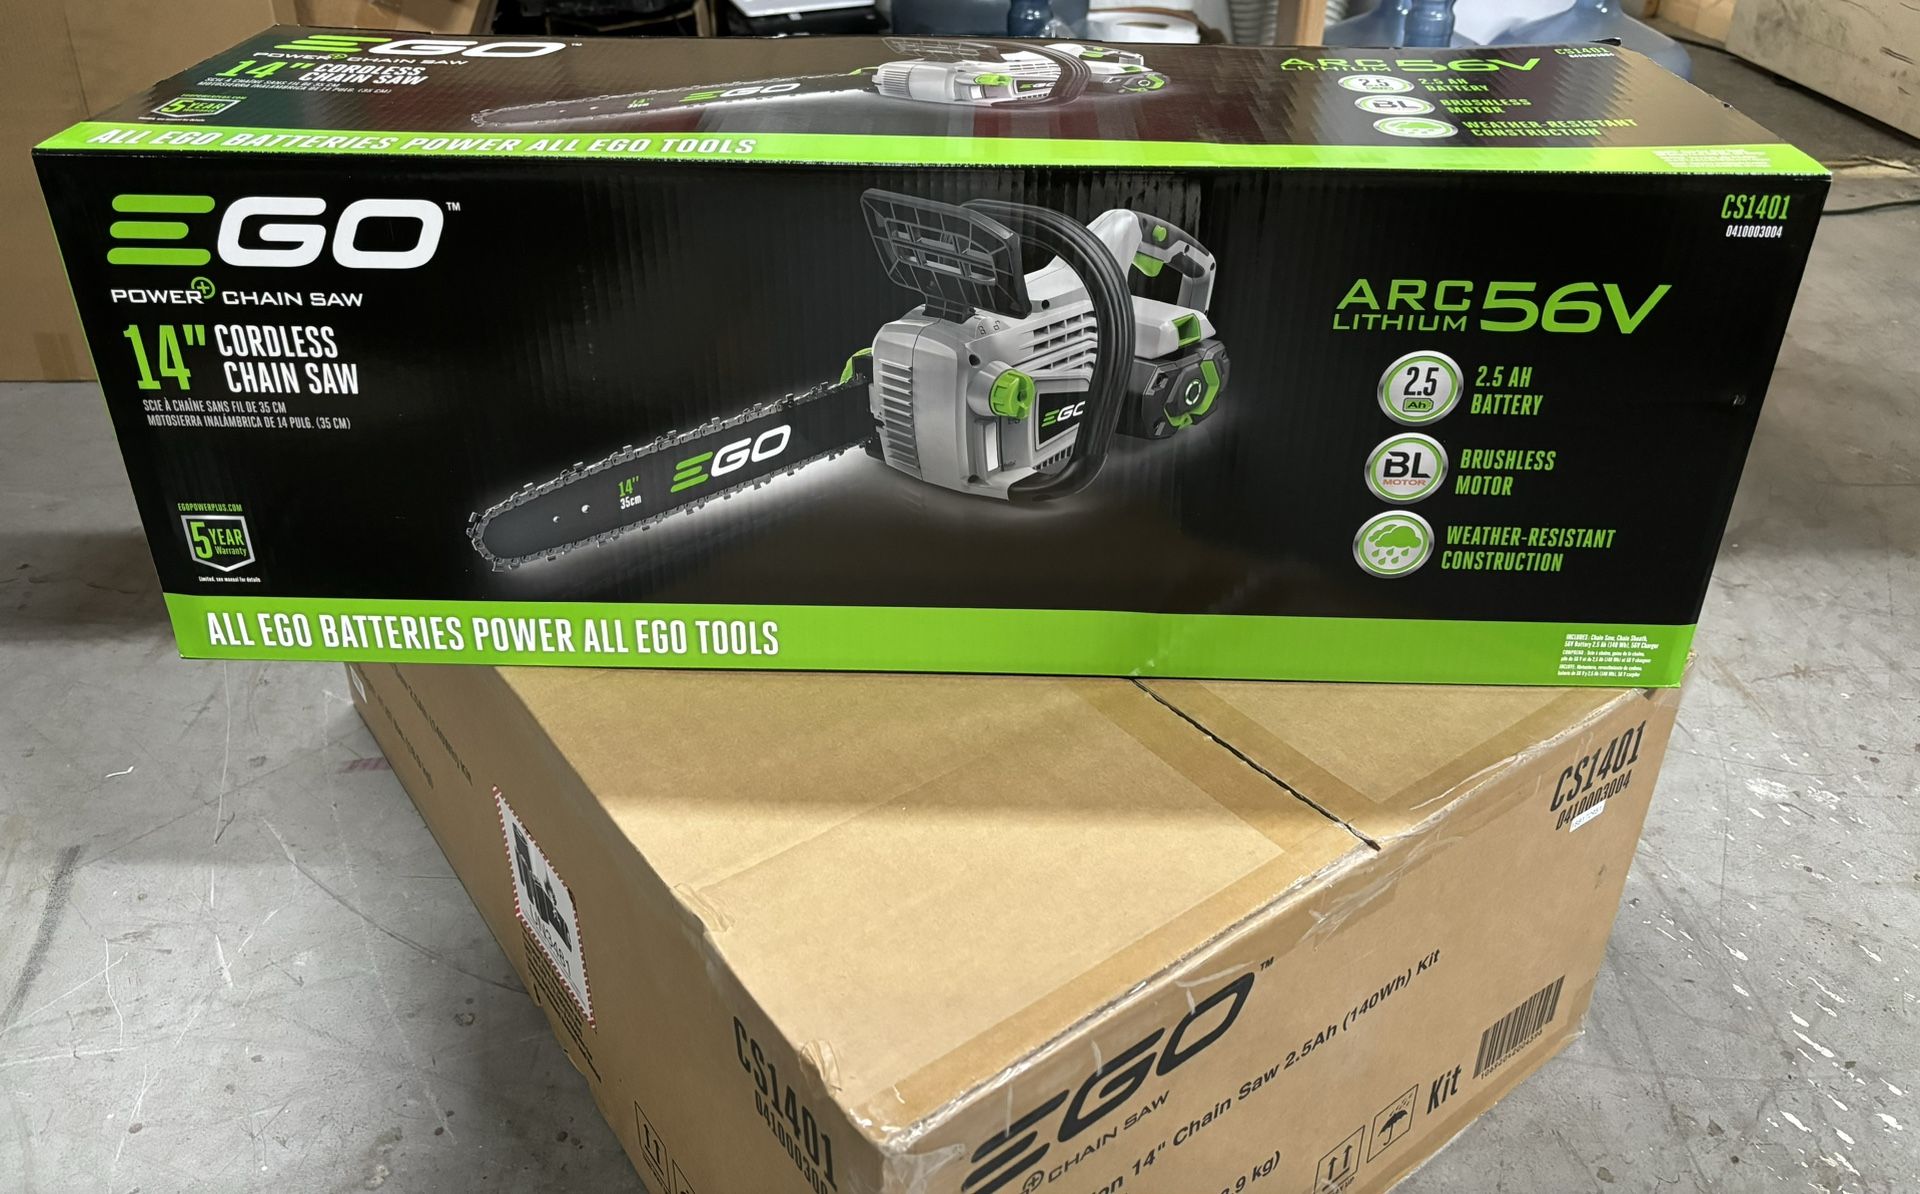 💥💥EGO POWER+ 56-volt 14-in Brushless Battery 2.5 Ah Chainsaw (Battery and Charger Included) NEW!!!!